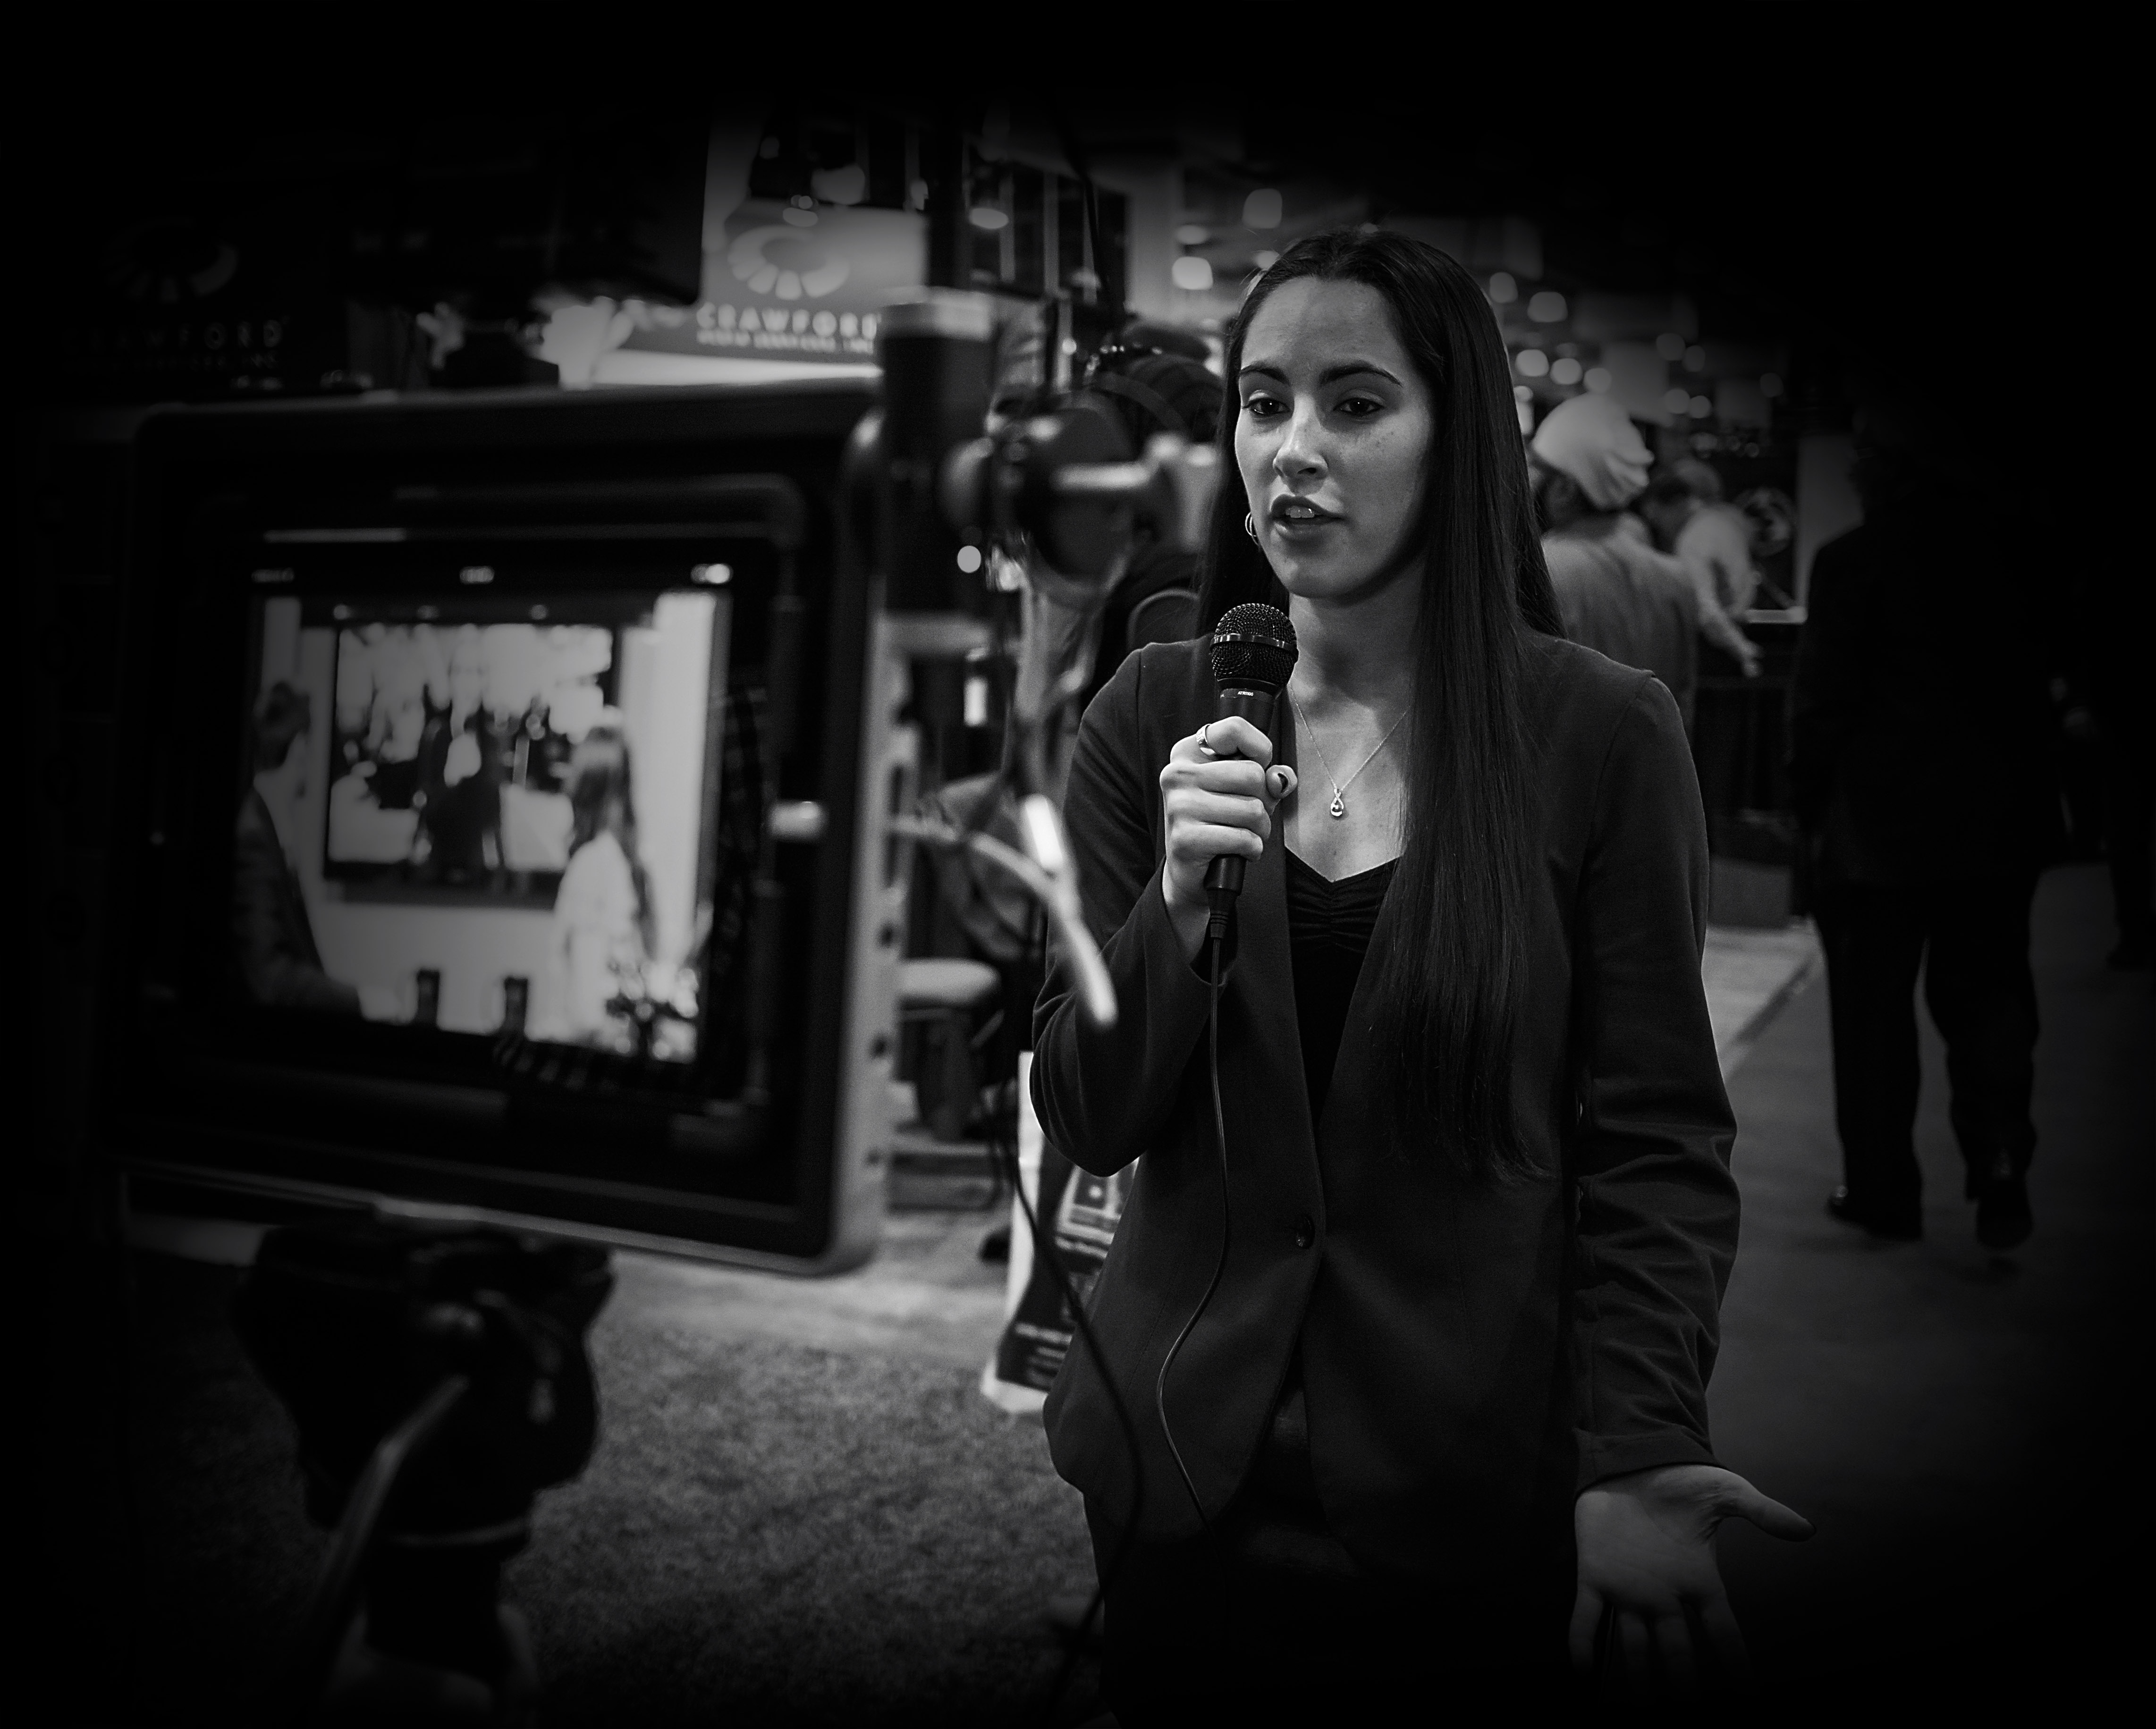 female student speaks into a microphone in front of a TV camera